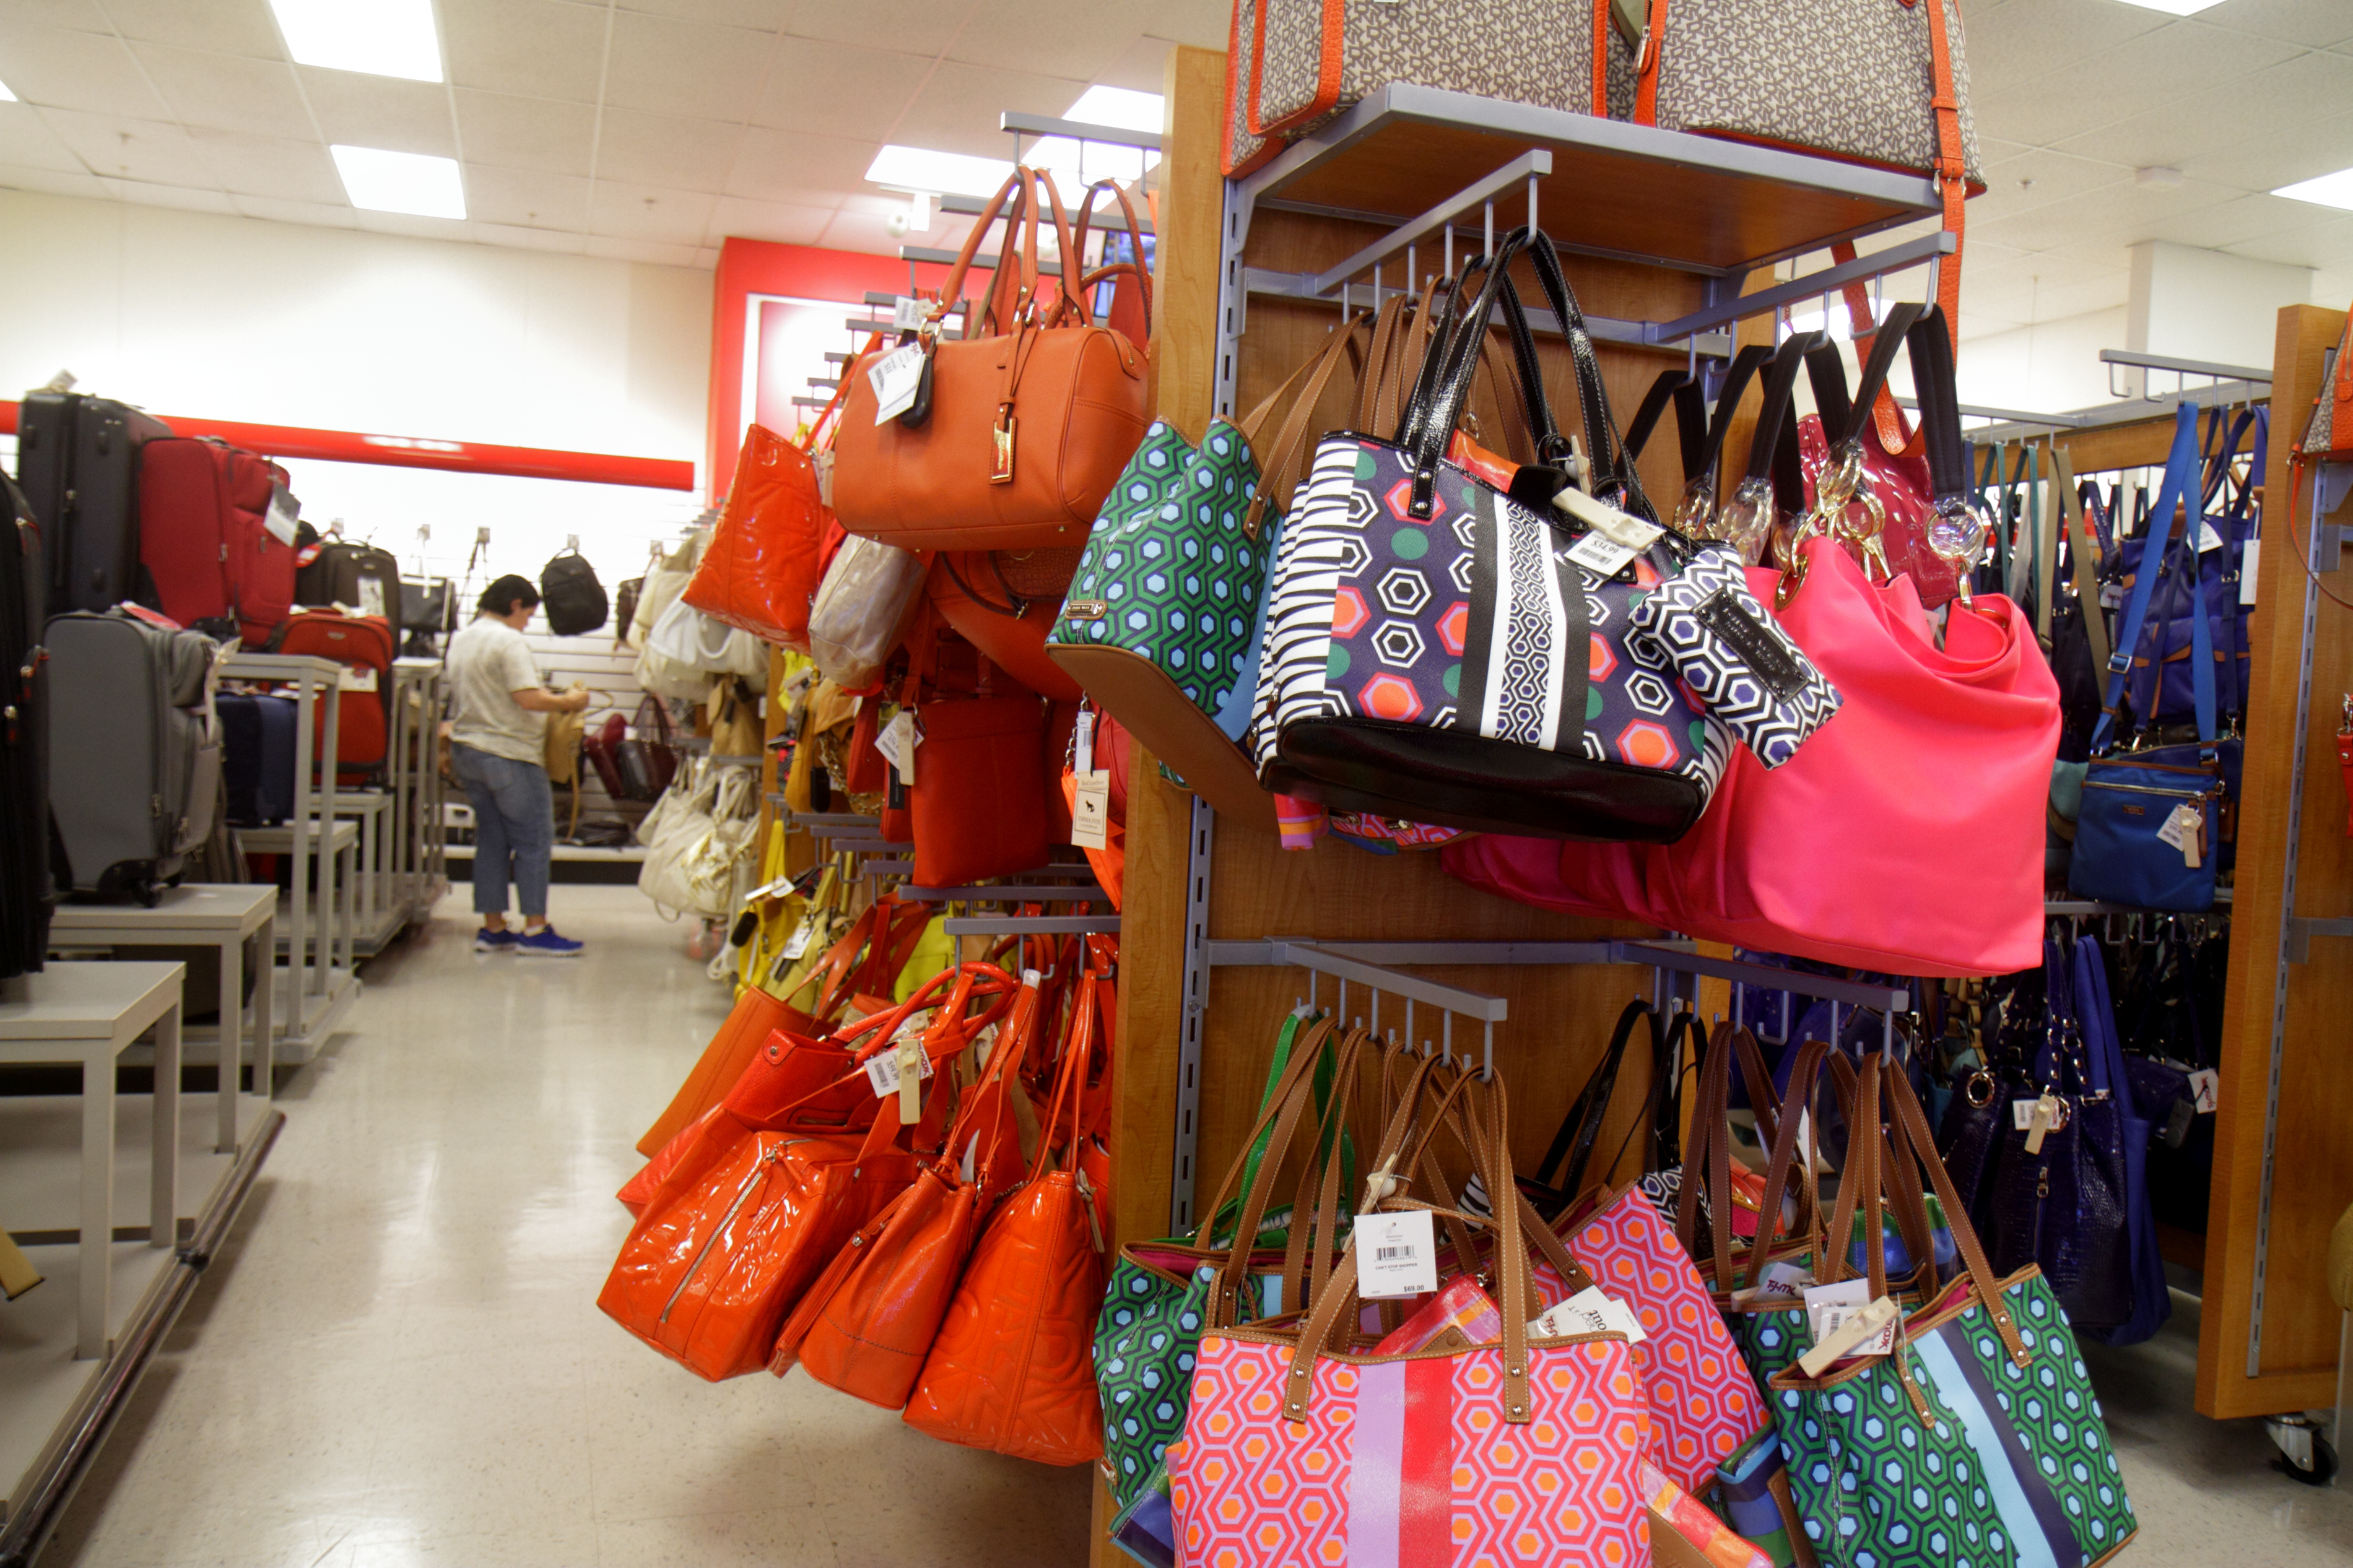 Natomas TJ Maxx now open, with clothes, accessories and more